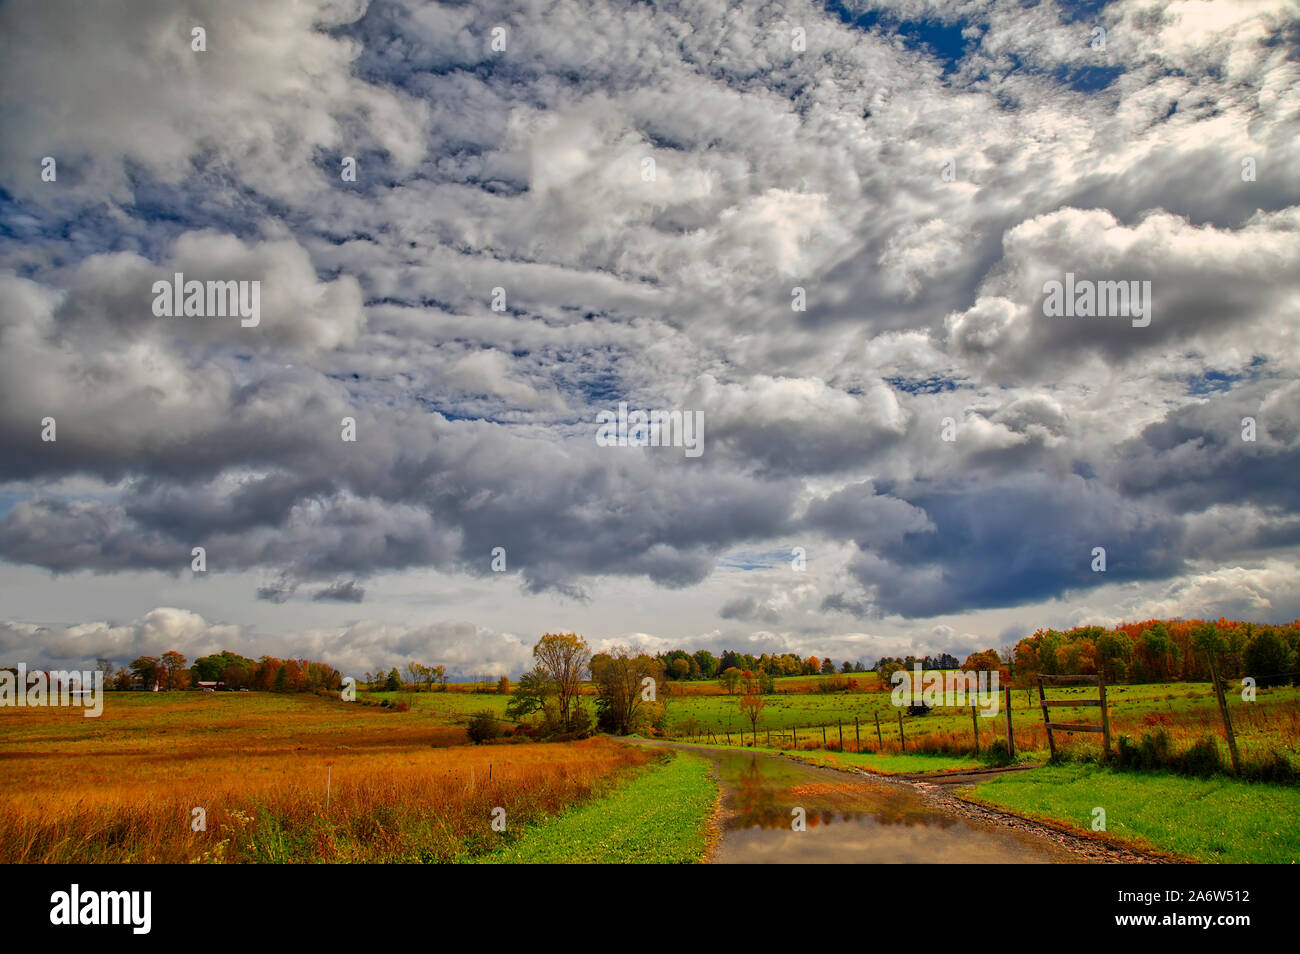 Rural New Paltz Hudson Valley, NY - Landscape view with a dramatic sky after a passing storm with the bright colors of peak fall foliage. Stock Photo